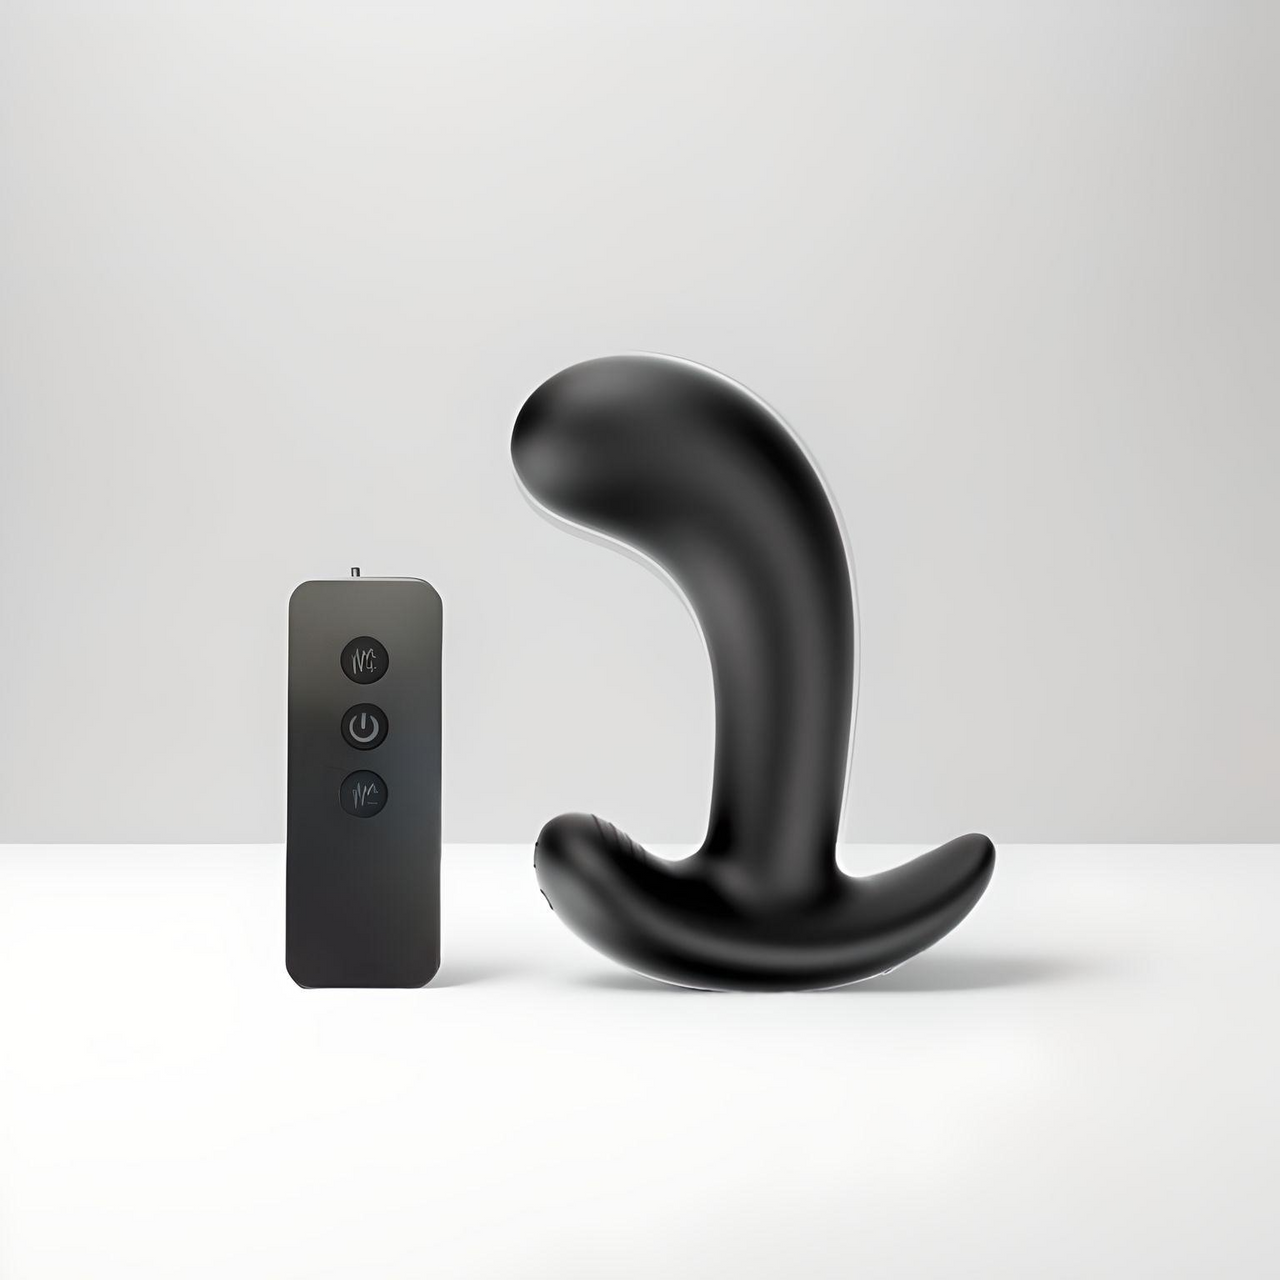 a remote control sitting next to a black object